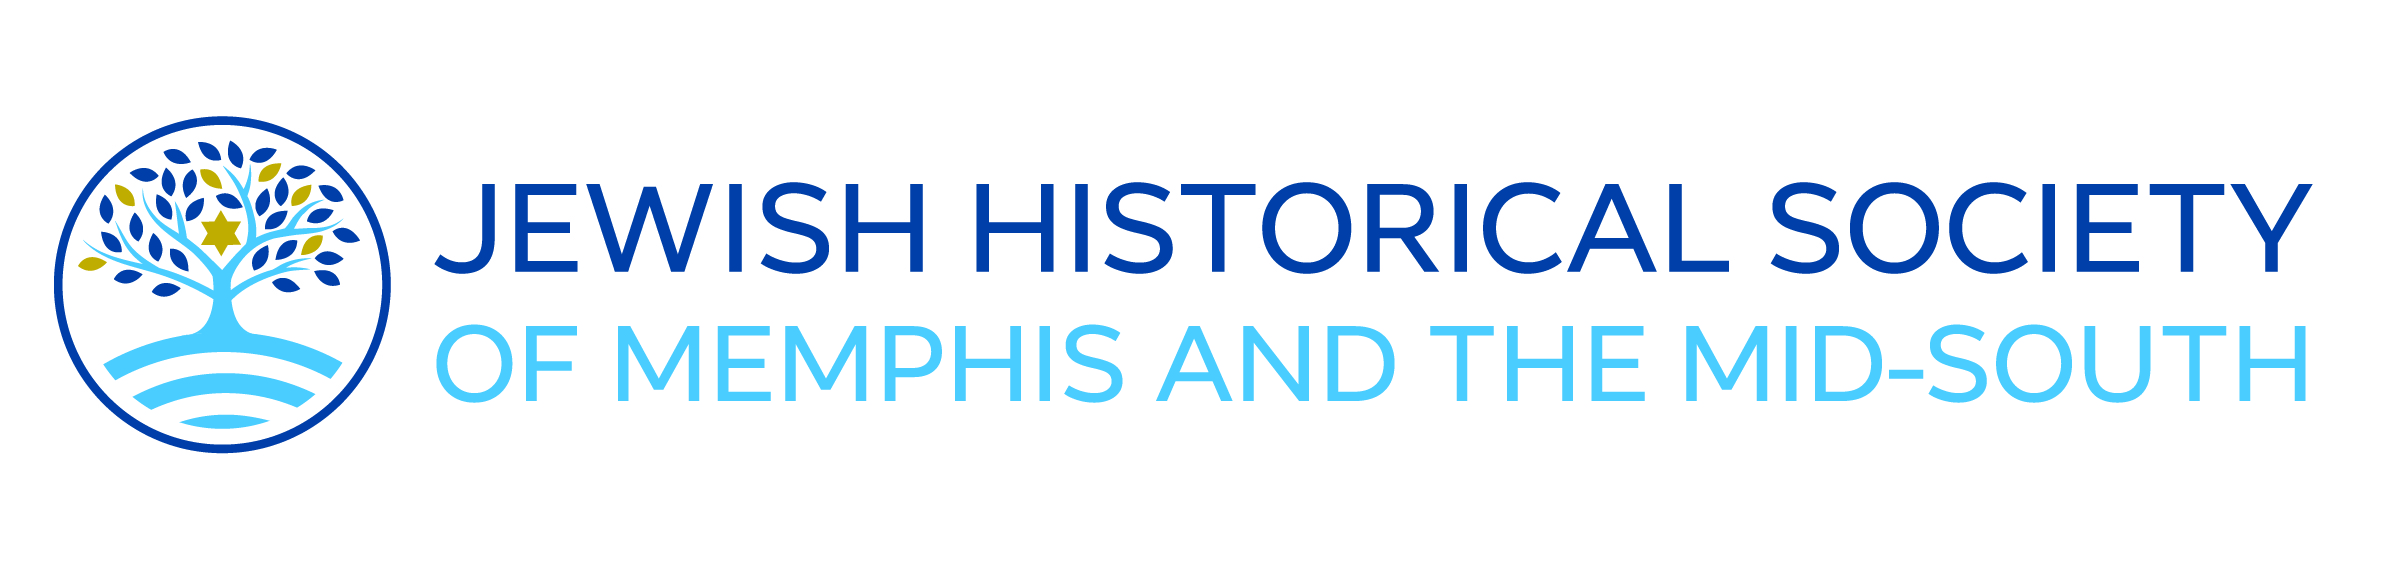 Jewish Historical Society of Memphis and Mid-South